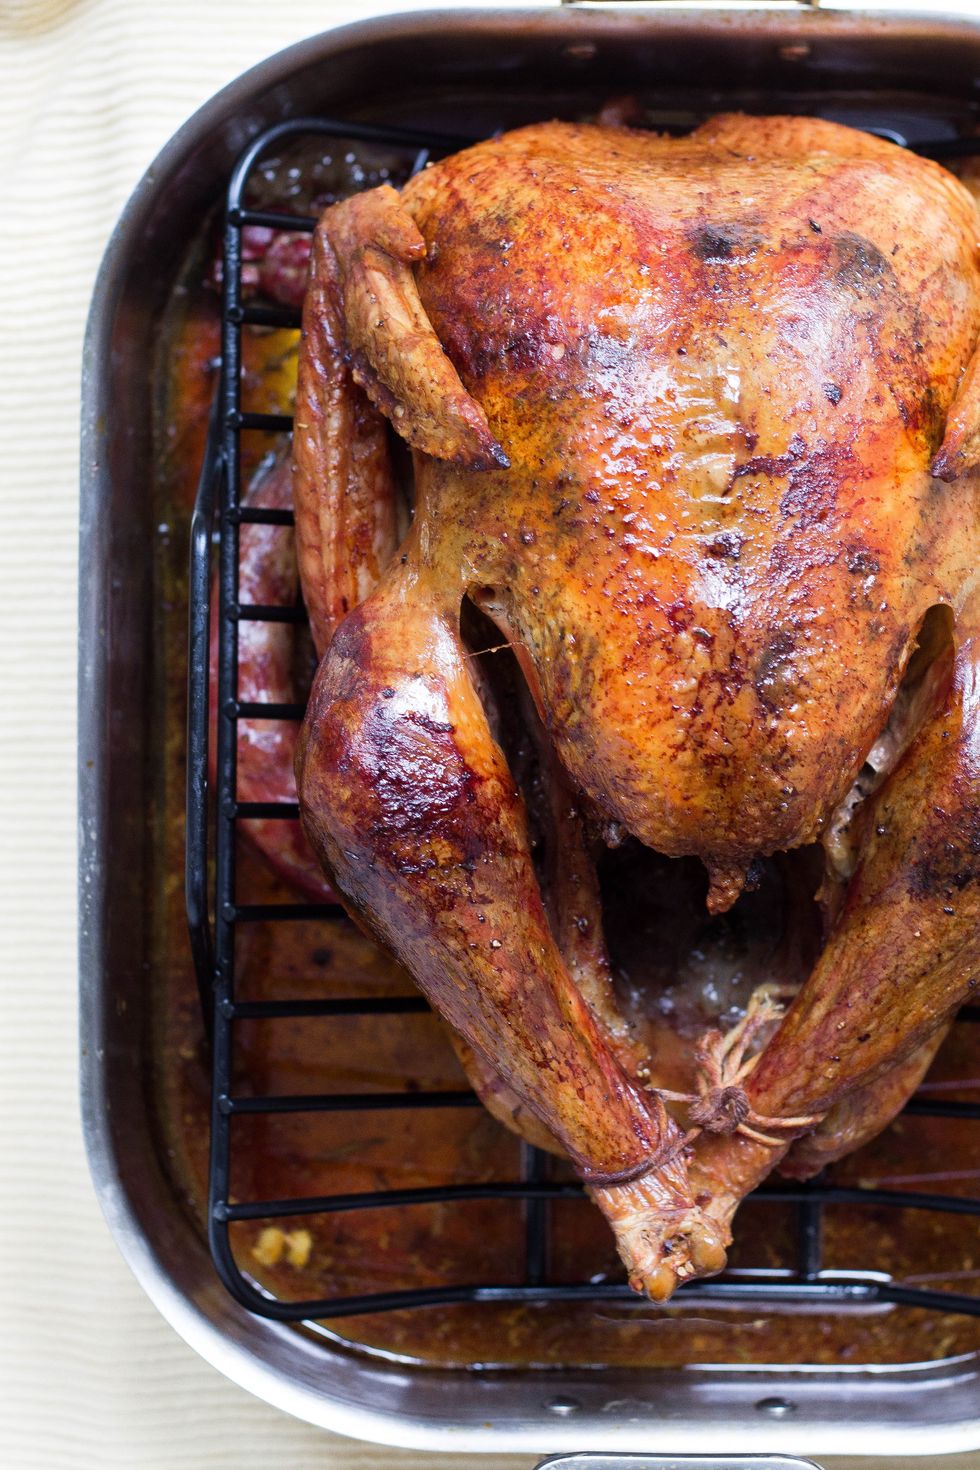 10 Ways To Make Holiday Leftovers Less "Blah" And More Festive